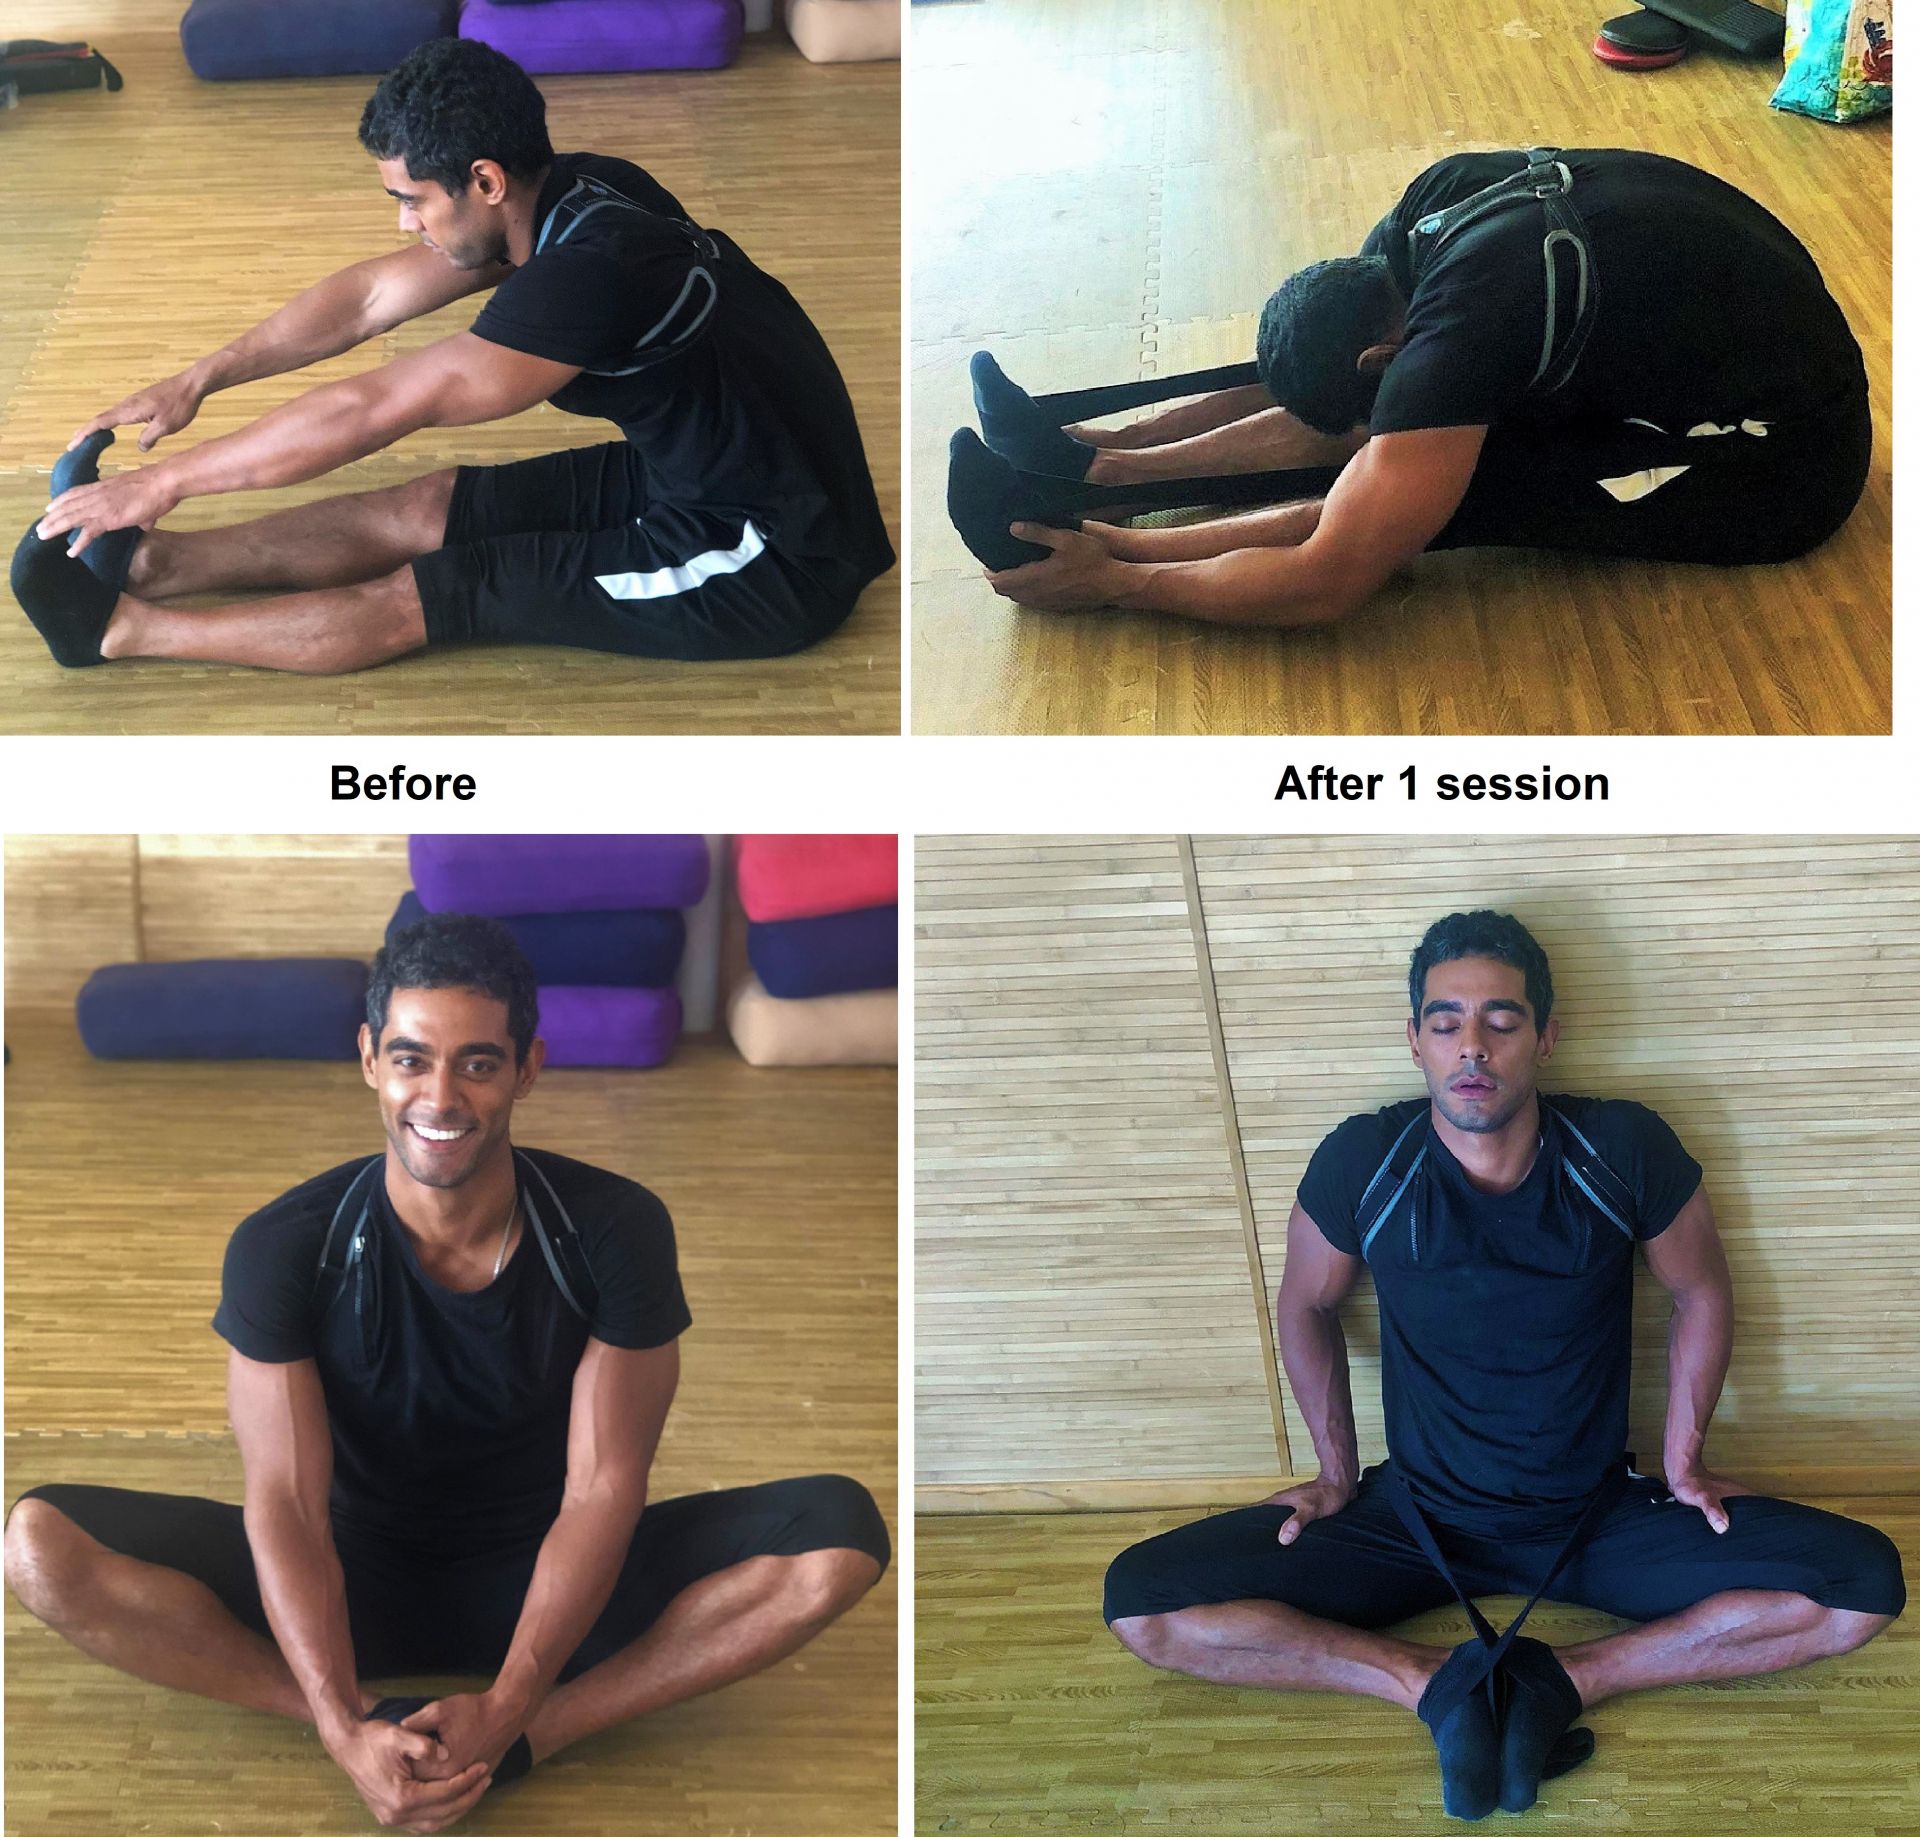 Actor Nick Sagar photos results increased flexibility in stretching hamstrings & hips